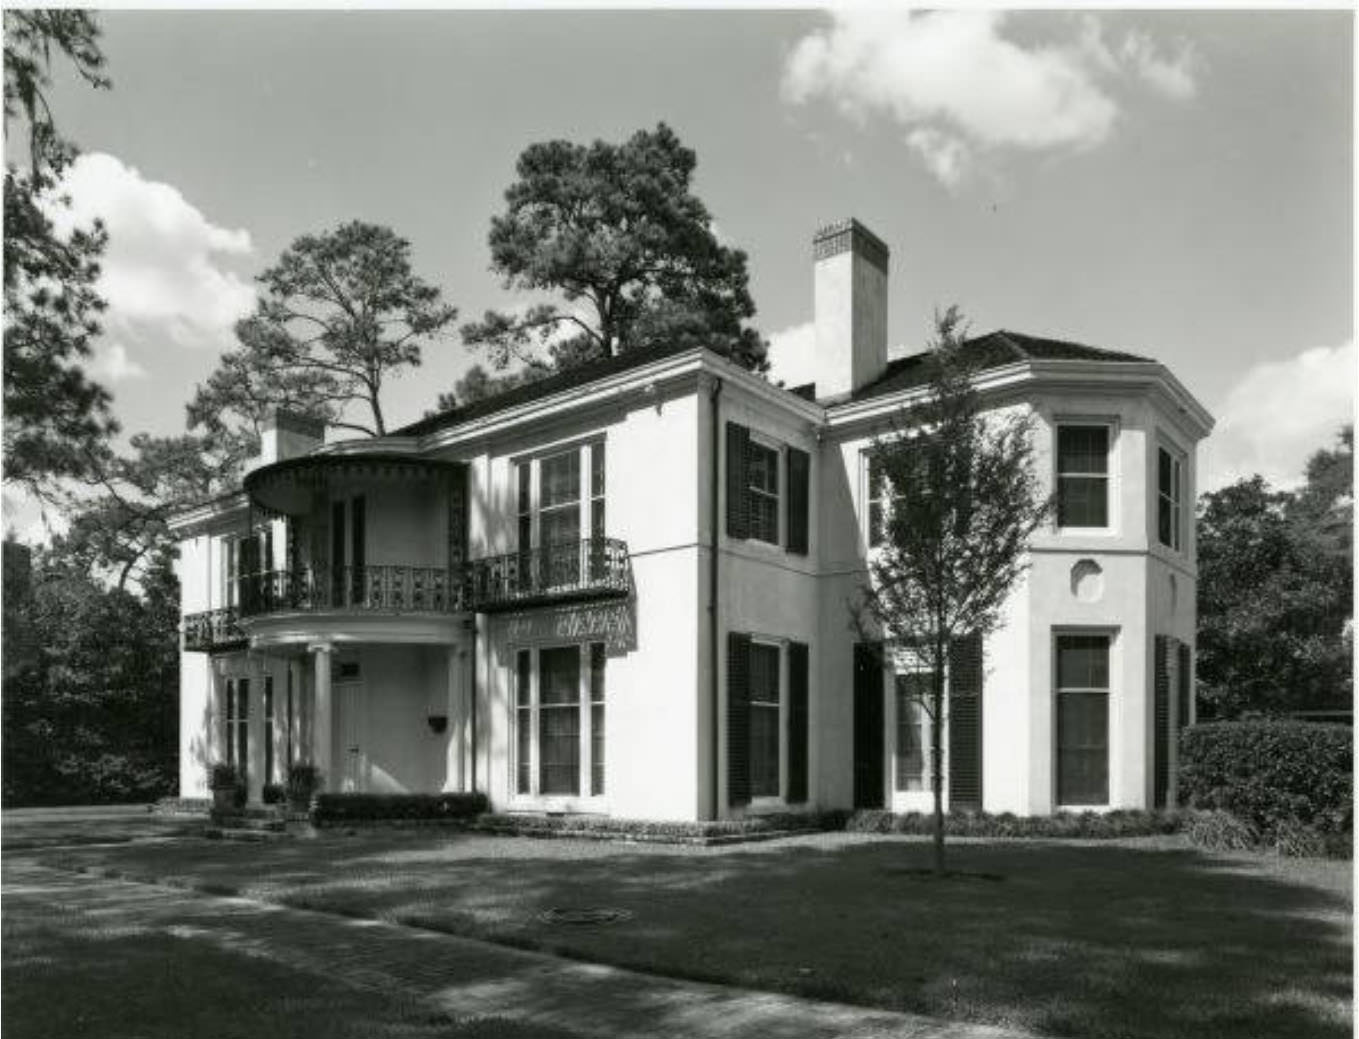 Mr. and Mrs. Dillon Anderson house, 1930s.